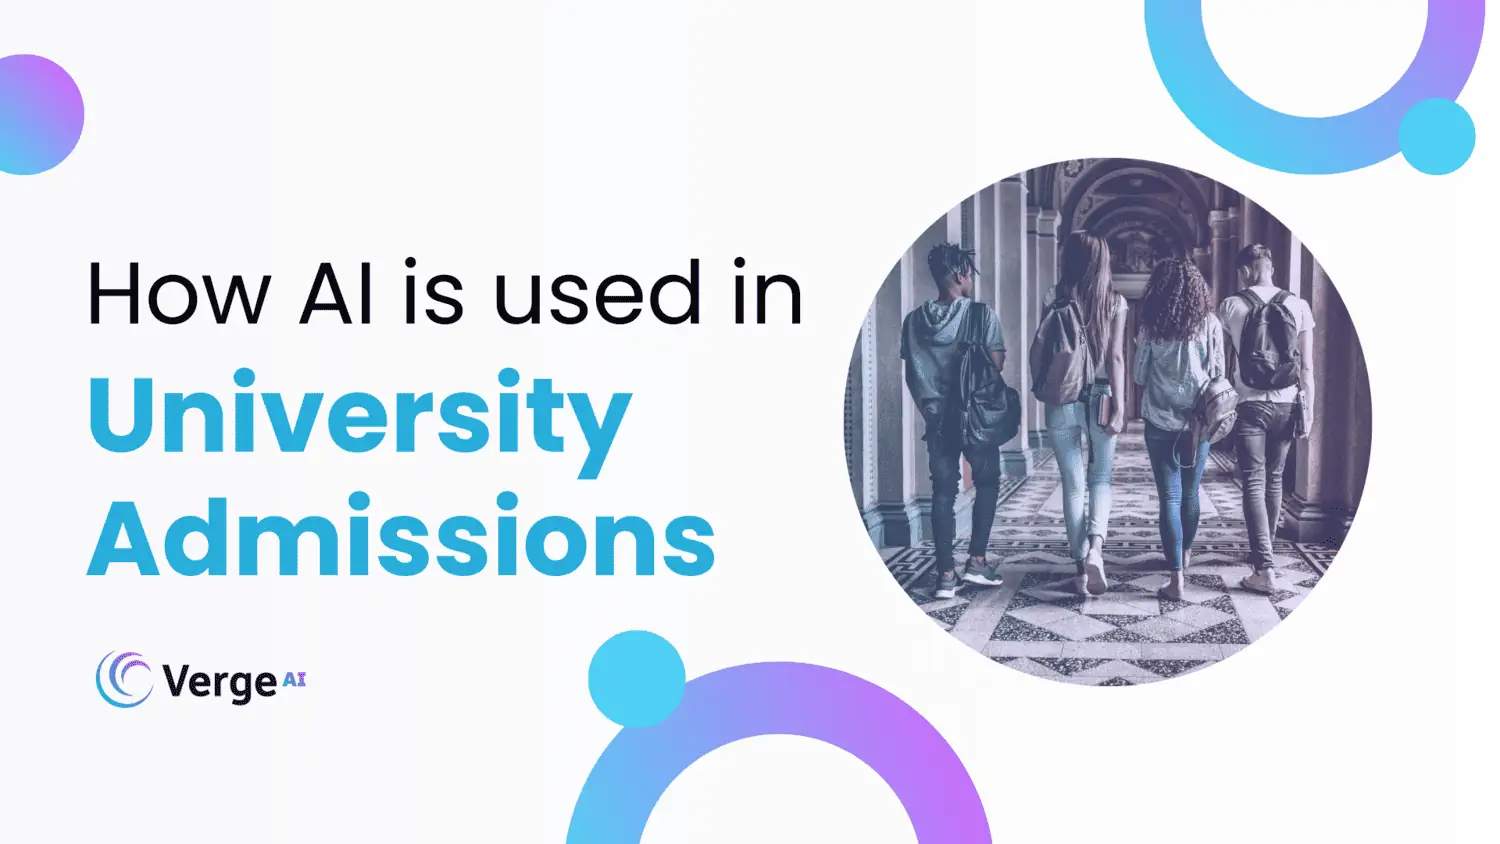 How AI is Used in University Admissions